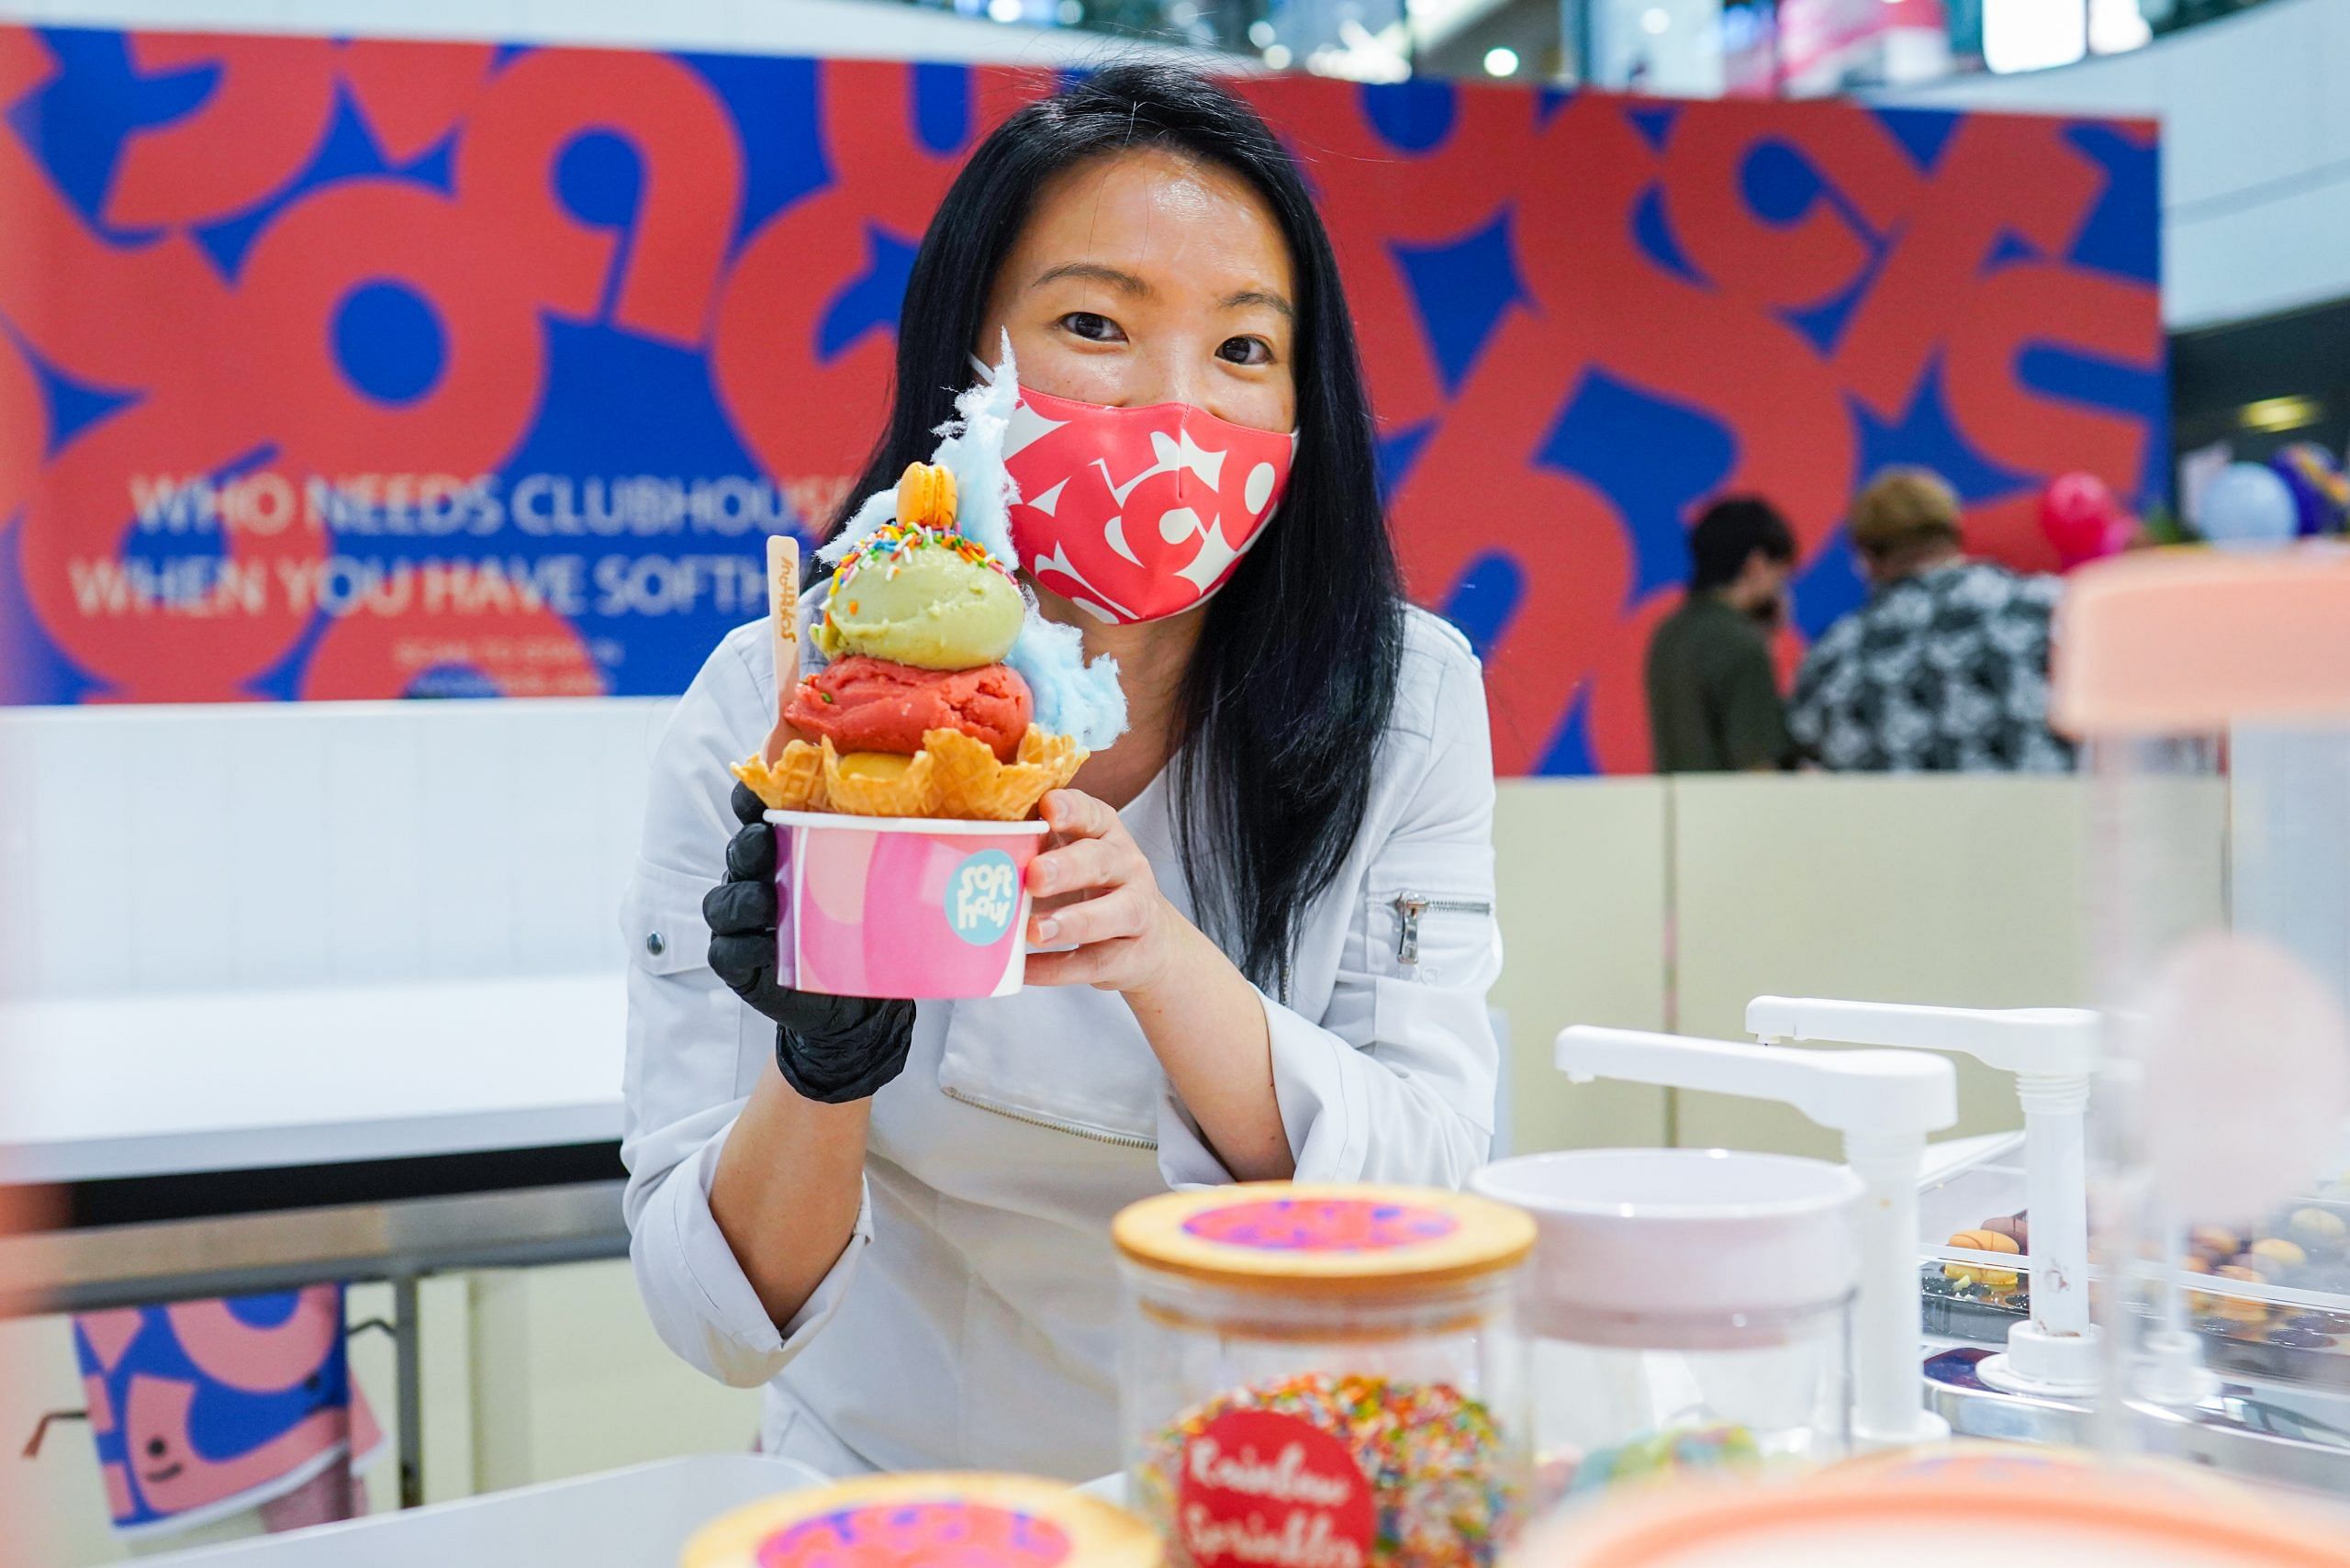 Janice Wong wants Softhaus ice cream store to be “a happy place for people”